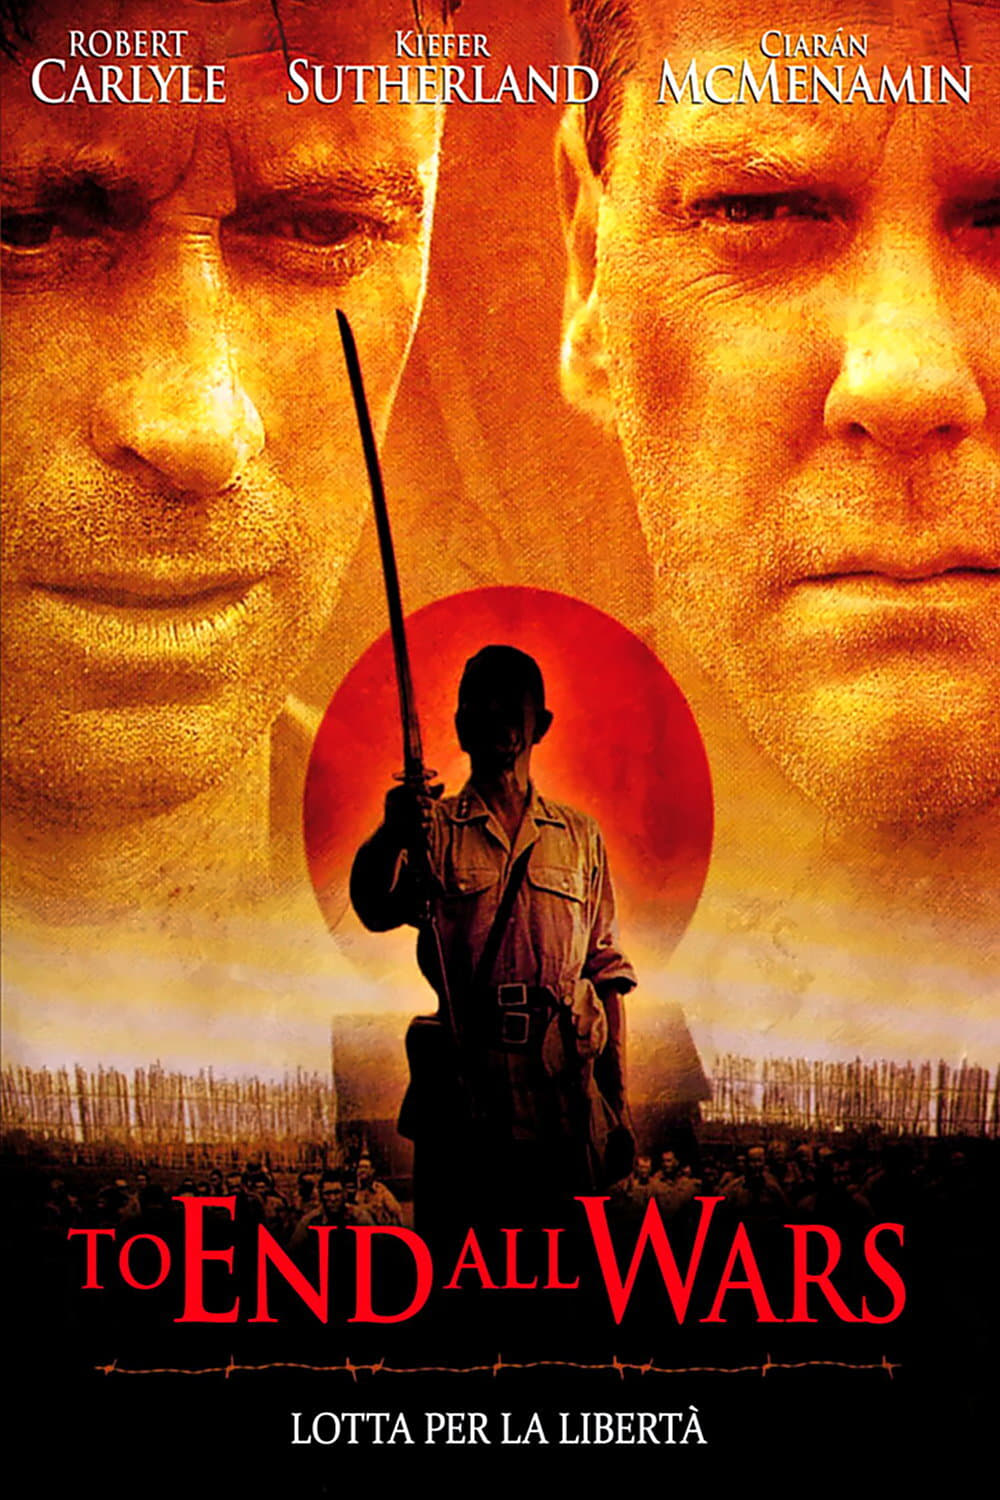 To End All Wars - Fight for Freedom film